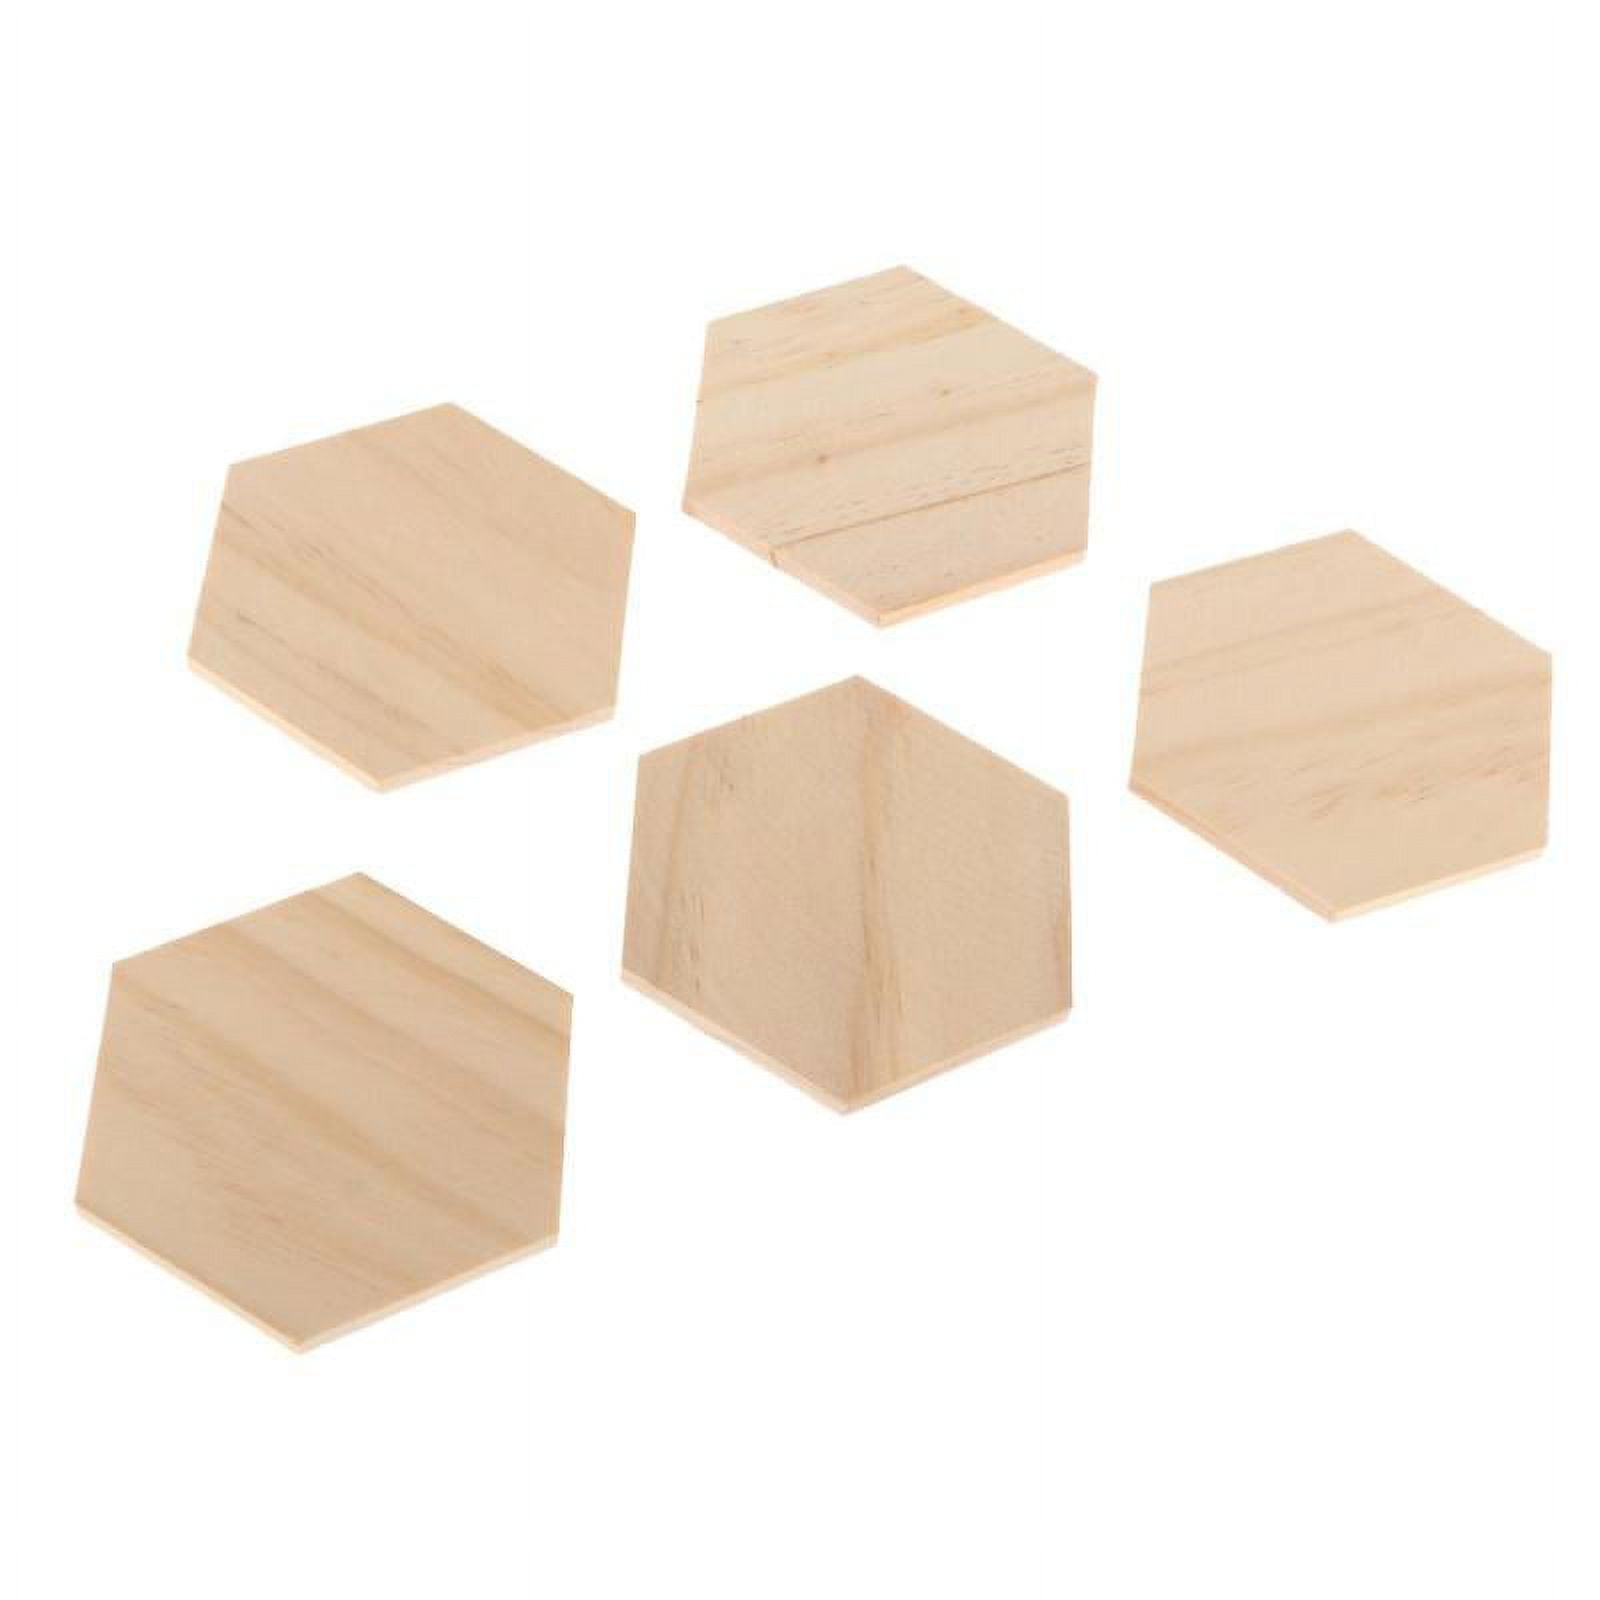 5 Pieces Natural Wood Hexagon Plaque Sign Slices Unfinished Wooden Shapes